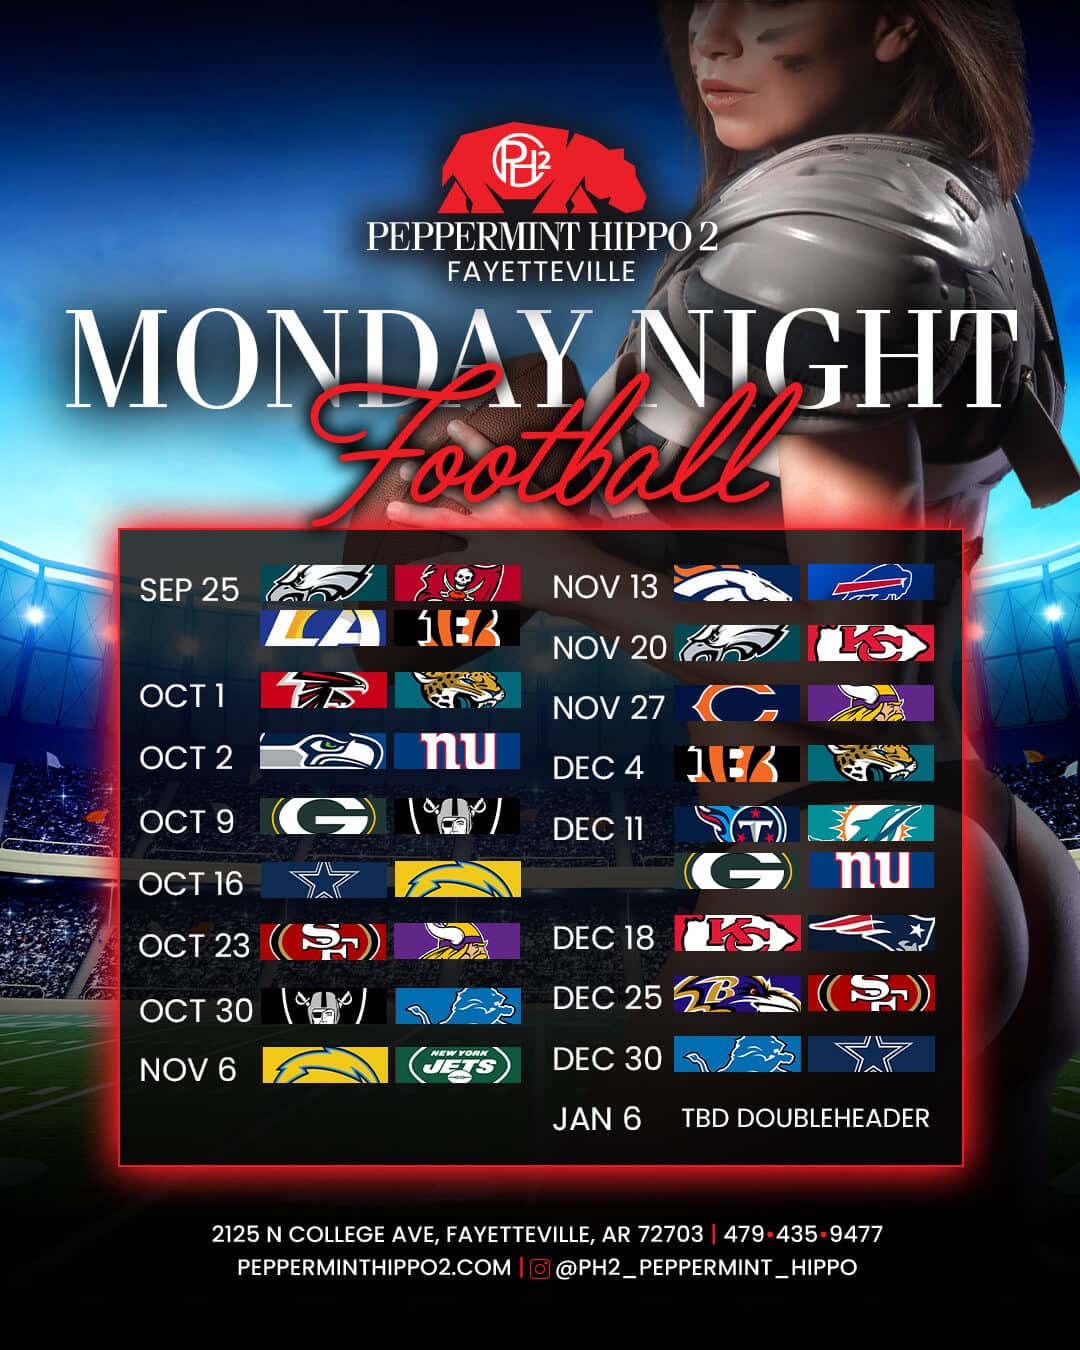 Monday Night Football at Peppermint Hippo Fayetteville